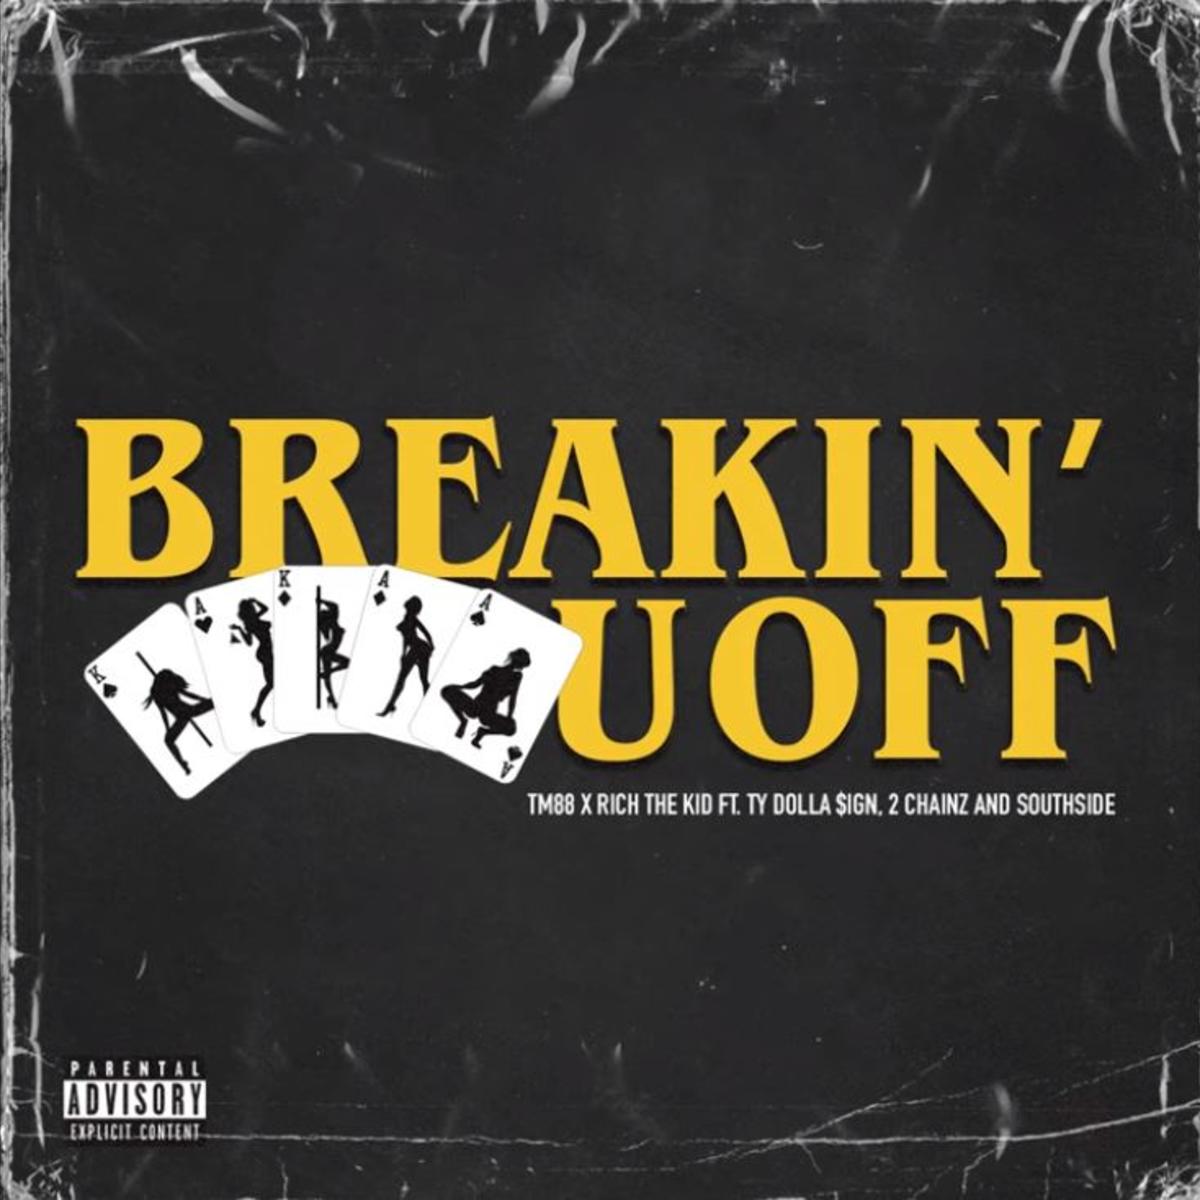 TM88 Recruits 2 Chainz, Rich The Kid, Ty Dolla $ign & Southside For “Breakin’ U Off”